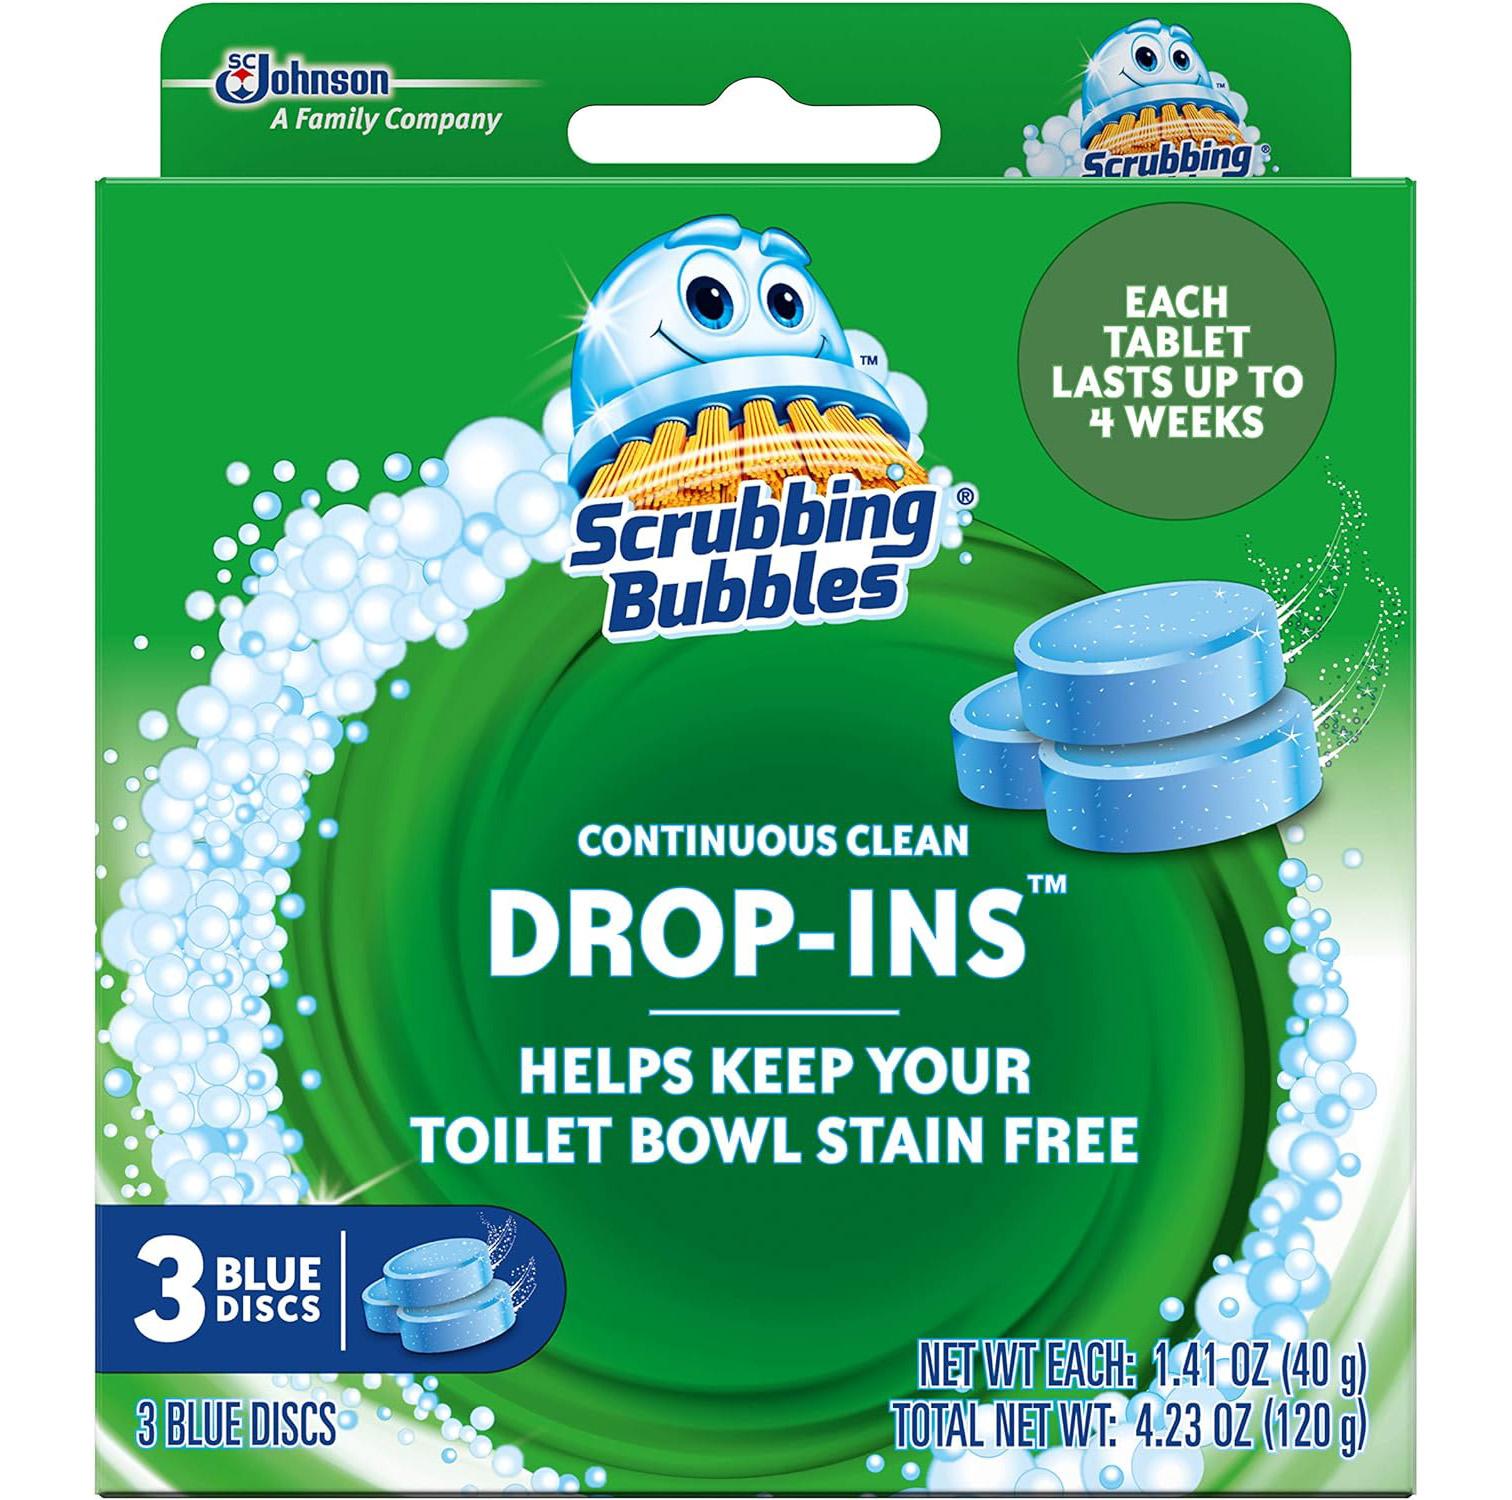 Scrubbing Bubbles Clean Drop-Ins Toilet Cleaner Tablets 6 Pack for $5.43 Shipped